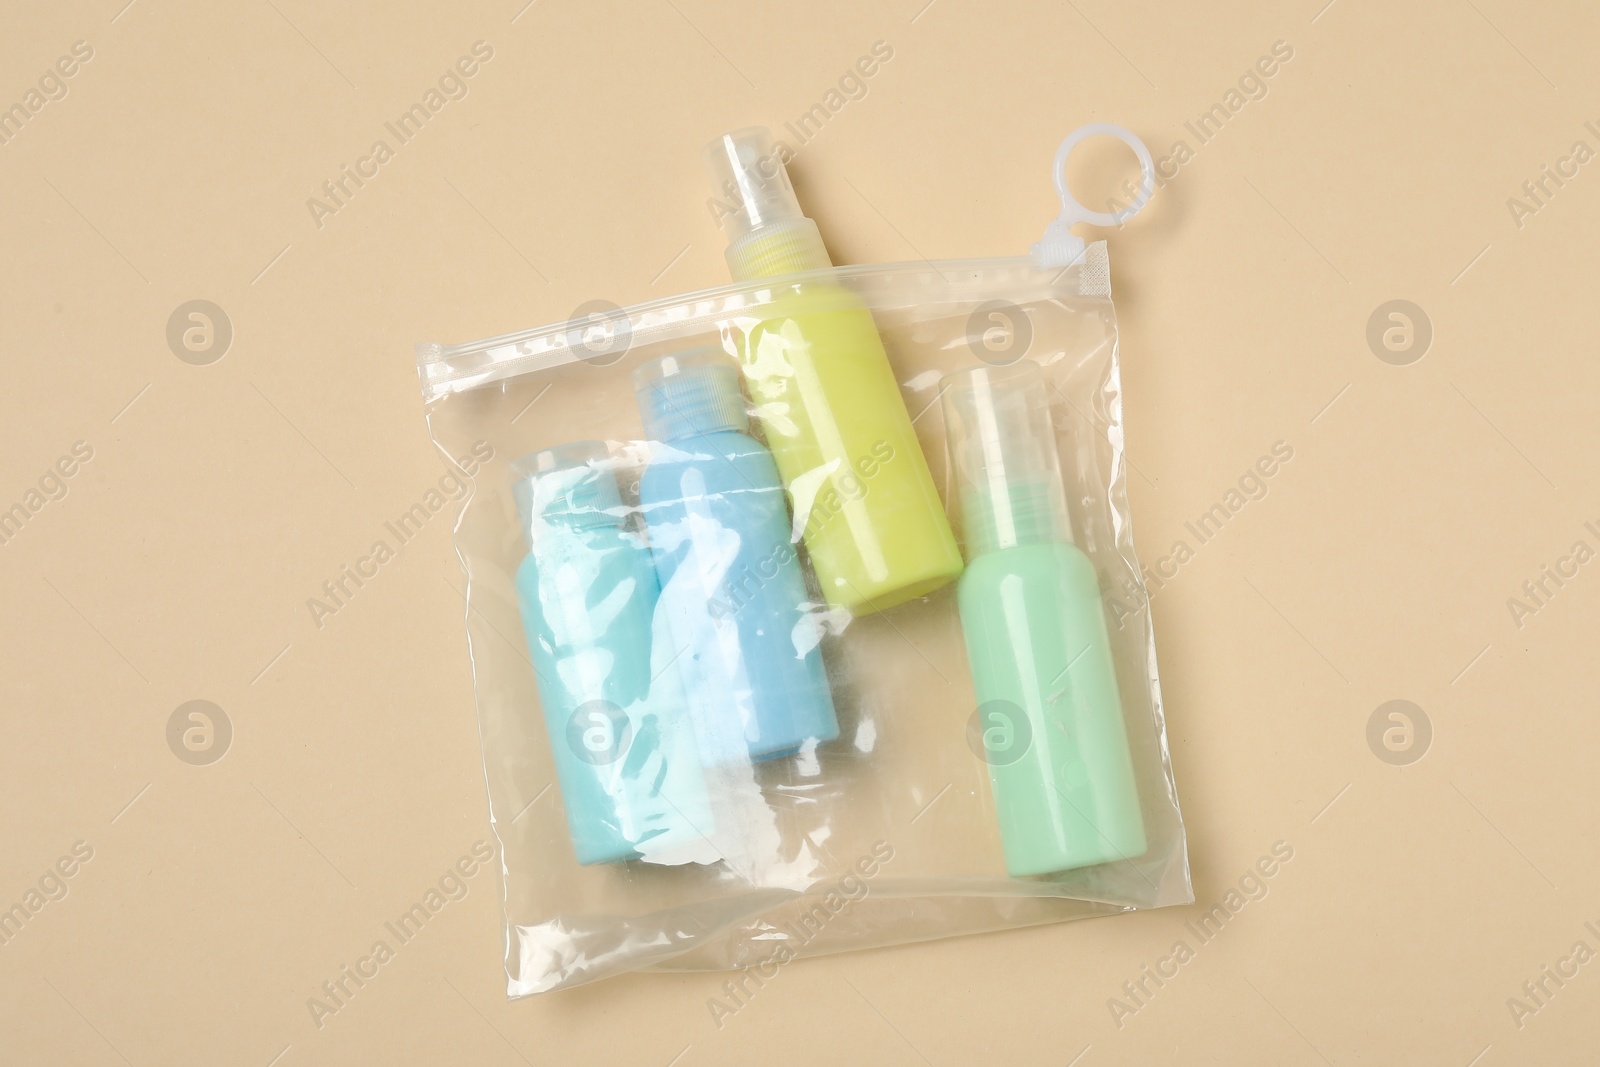 Photo of Cosmetic travel kit in plastic bag on beige background, top view. Bath accessories